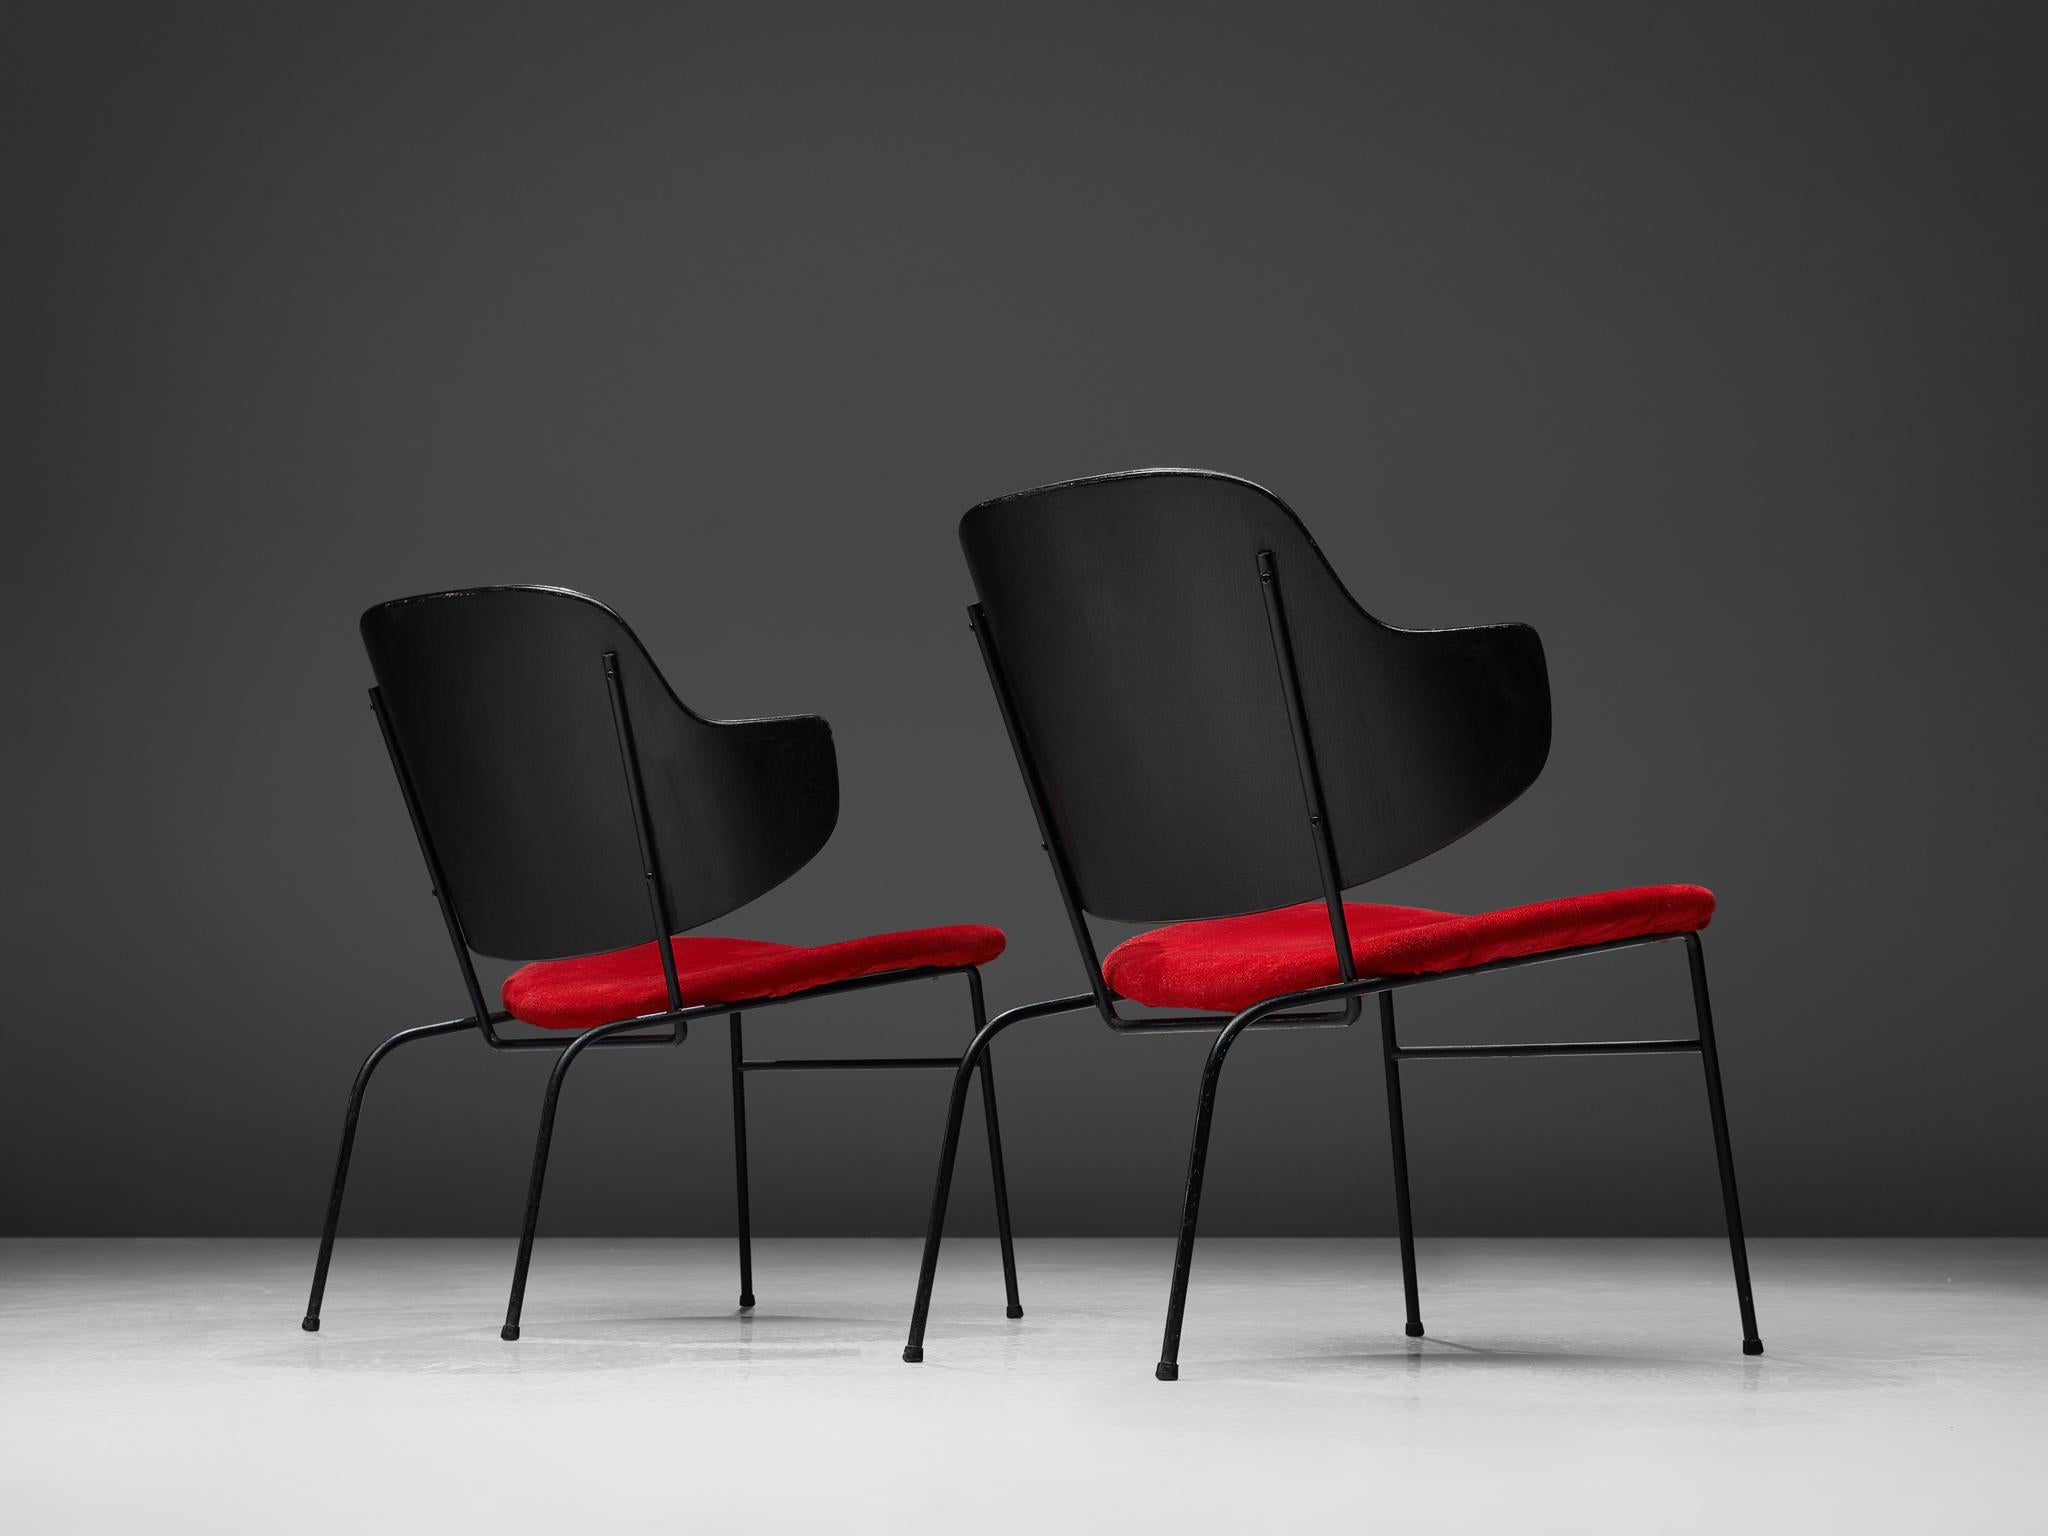 Ib Kofod-Larsen, set of 2 'Penguin' lounge chairs, wood, steel, metal and red fabric upholstery, Denmark, design 1953, production 1960s.

The 'Penguin' slipper chair was first taken into production by Selig in 1953. The chairs are always built up